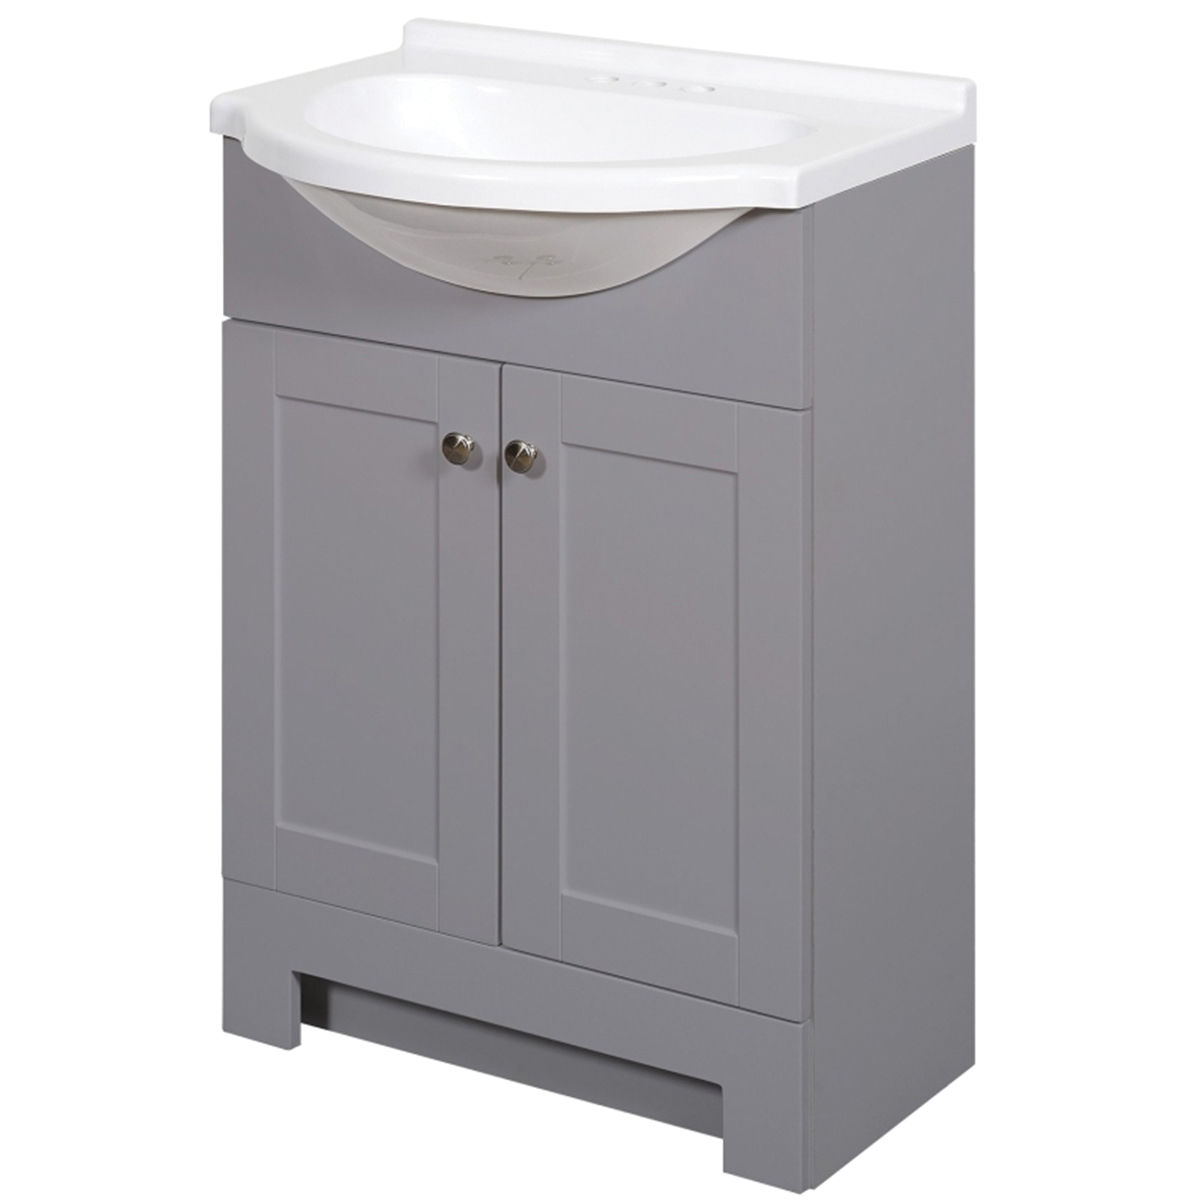 SEC24GY 2-Door Euro Shaker Vanity with Top, Wood, Cool Gray, Cultured Marble Sink, White Sink